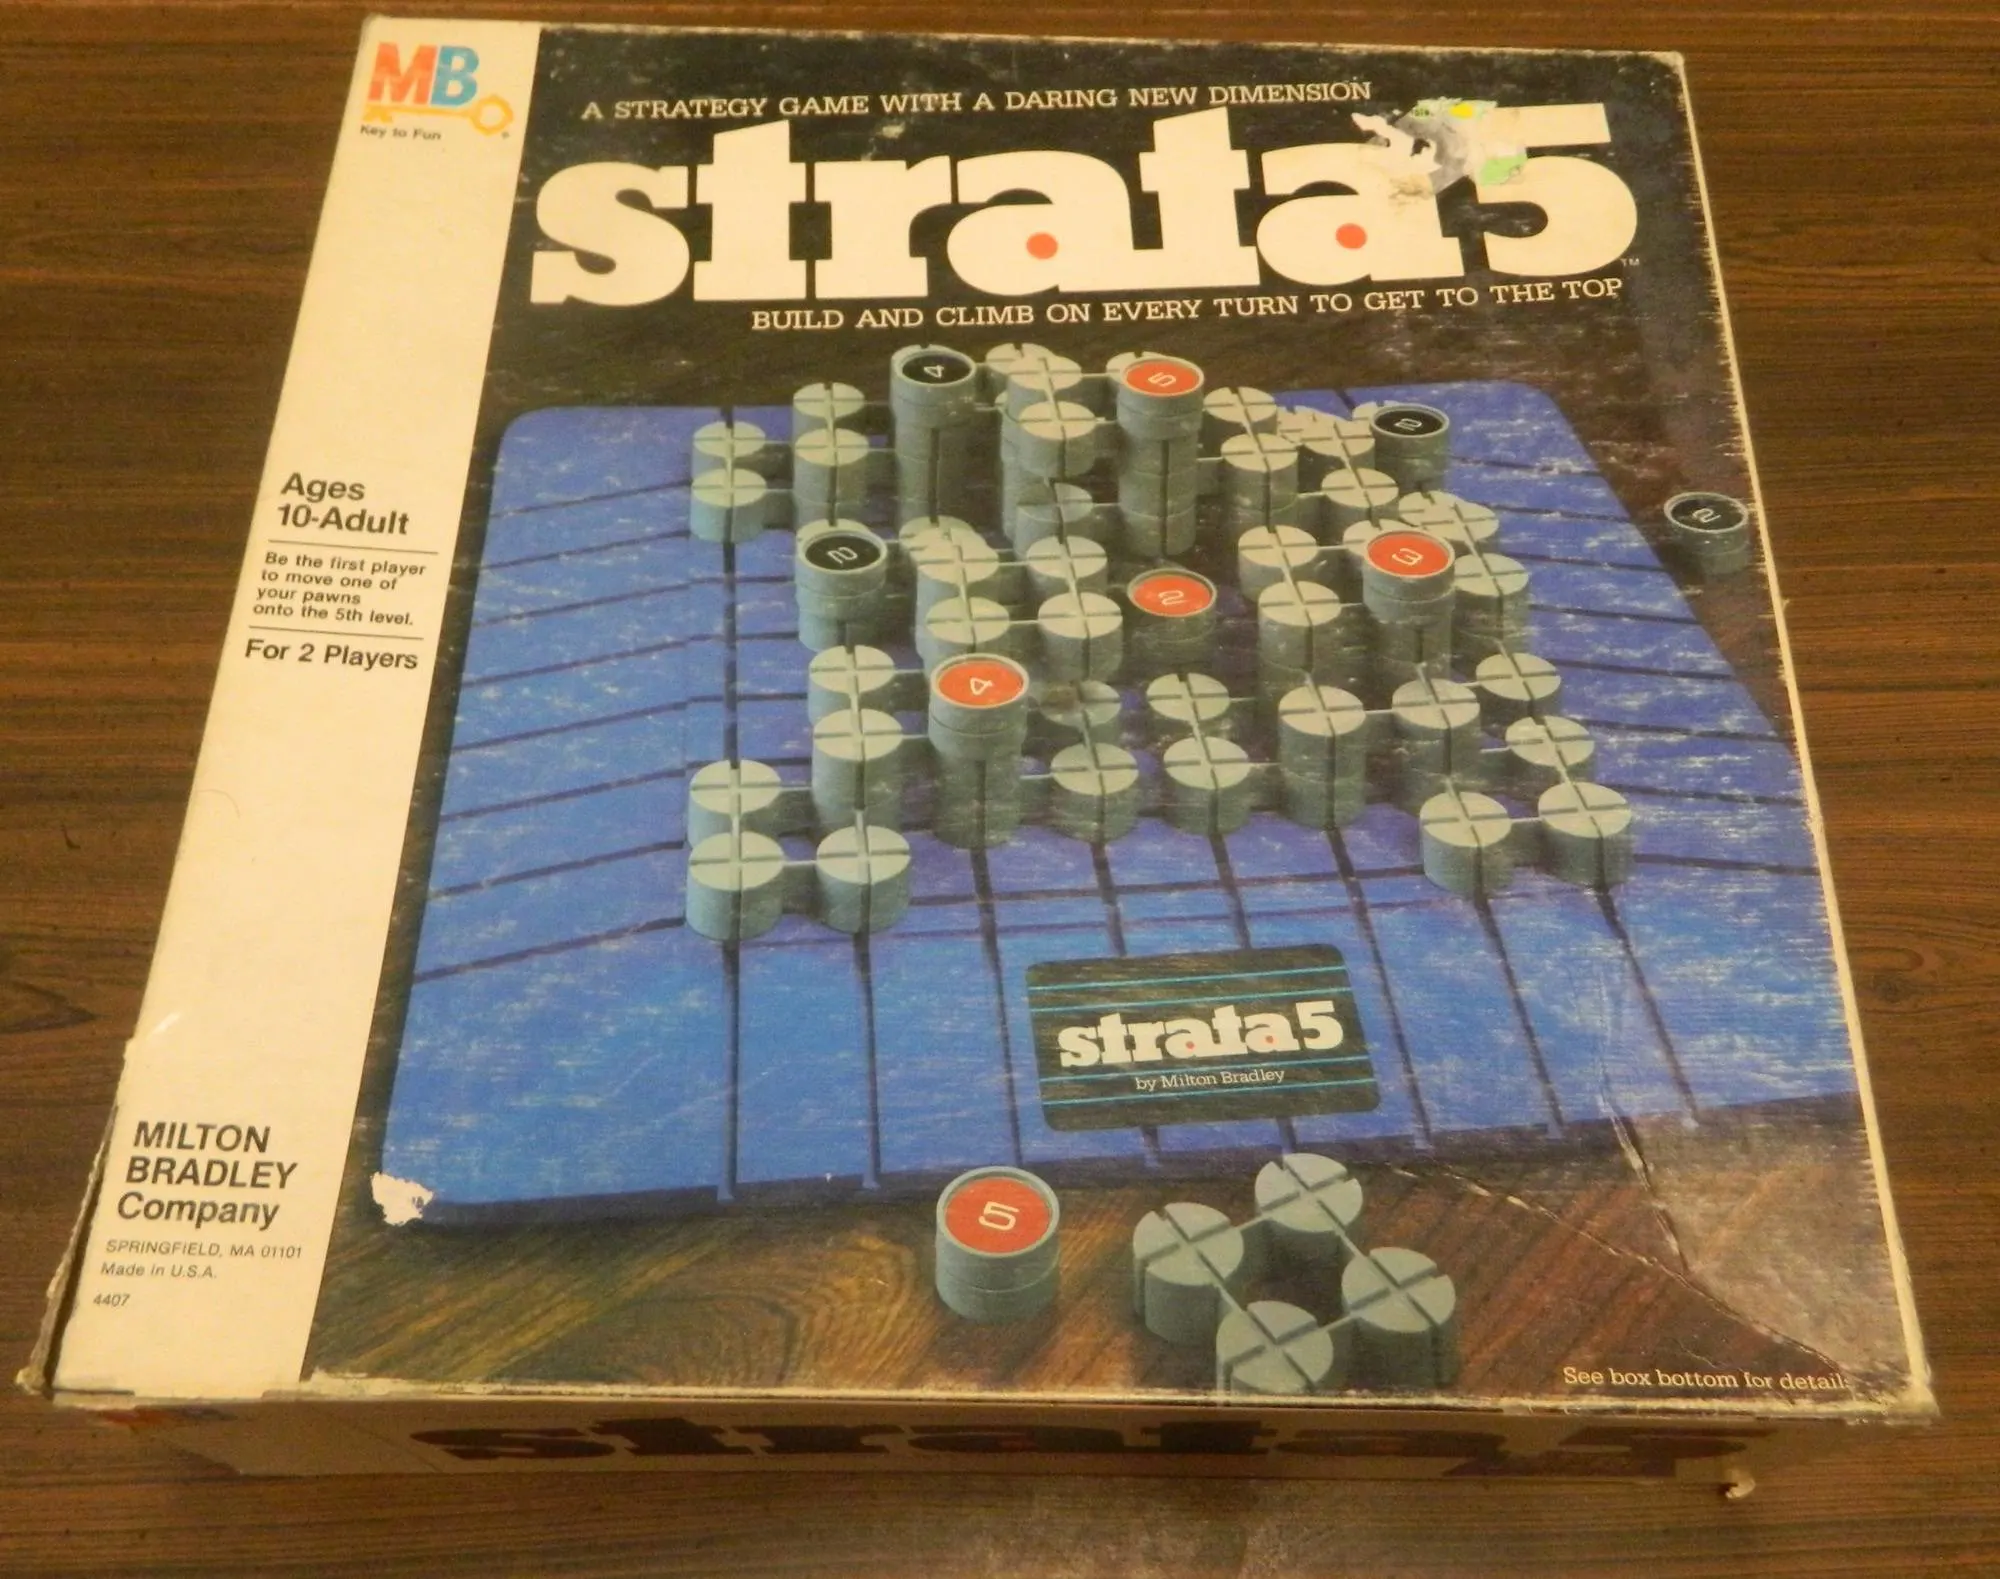 Strata 5 Board Game Review and Rules - Geeky Hobbies